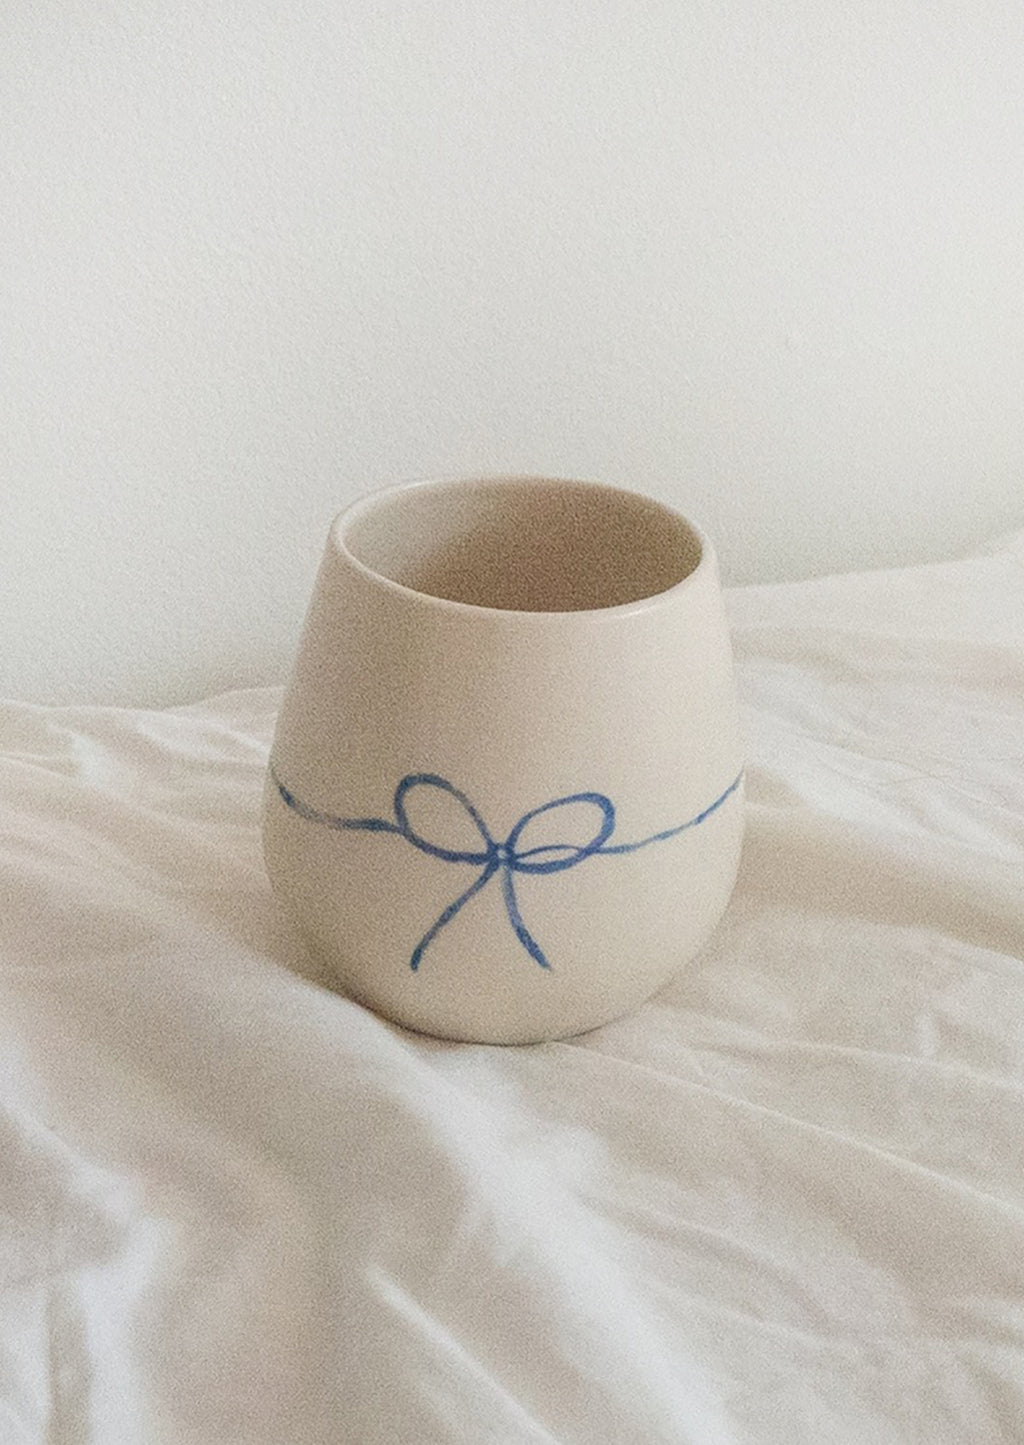 2: A white rounded ceramic cup with hand painted blue bow.